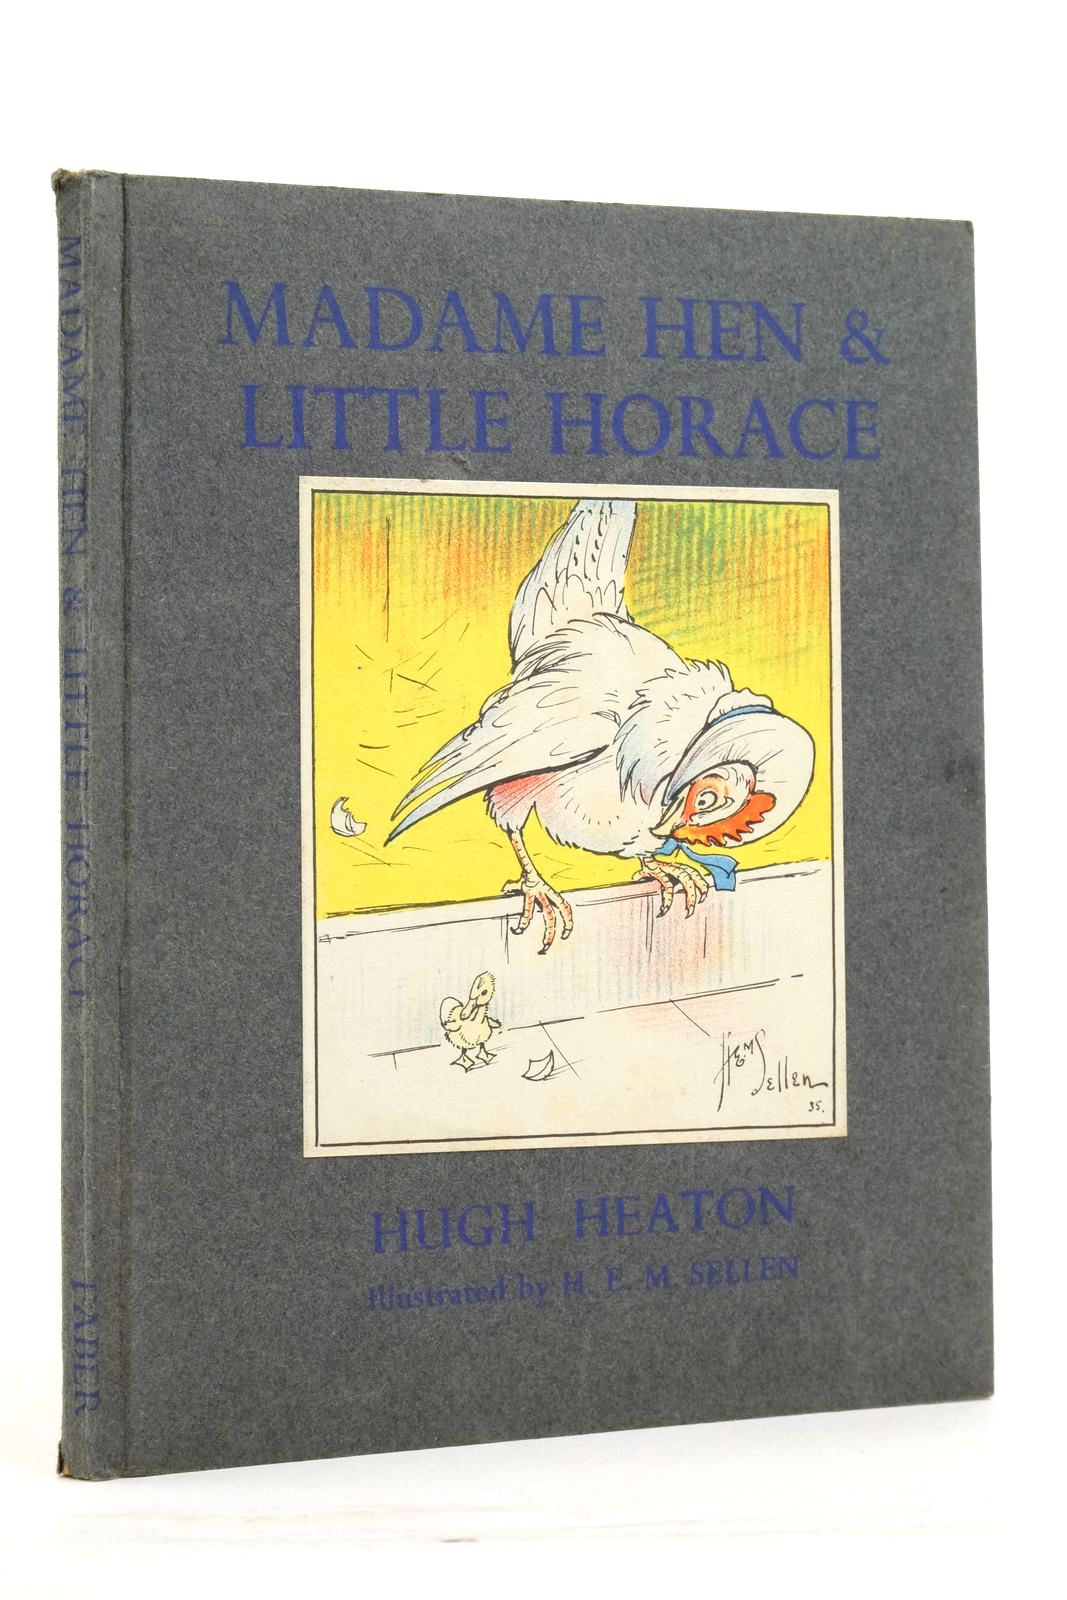 Photo of MADAM HEN AND LITTLE HORACE written by Heaton, Hugh illustrated by Sellen, H.E.M. (STOCK CODE: 2137449)  for sale by Stella & Rose's Books